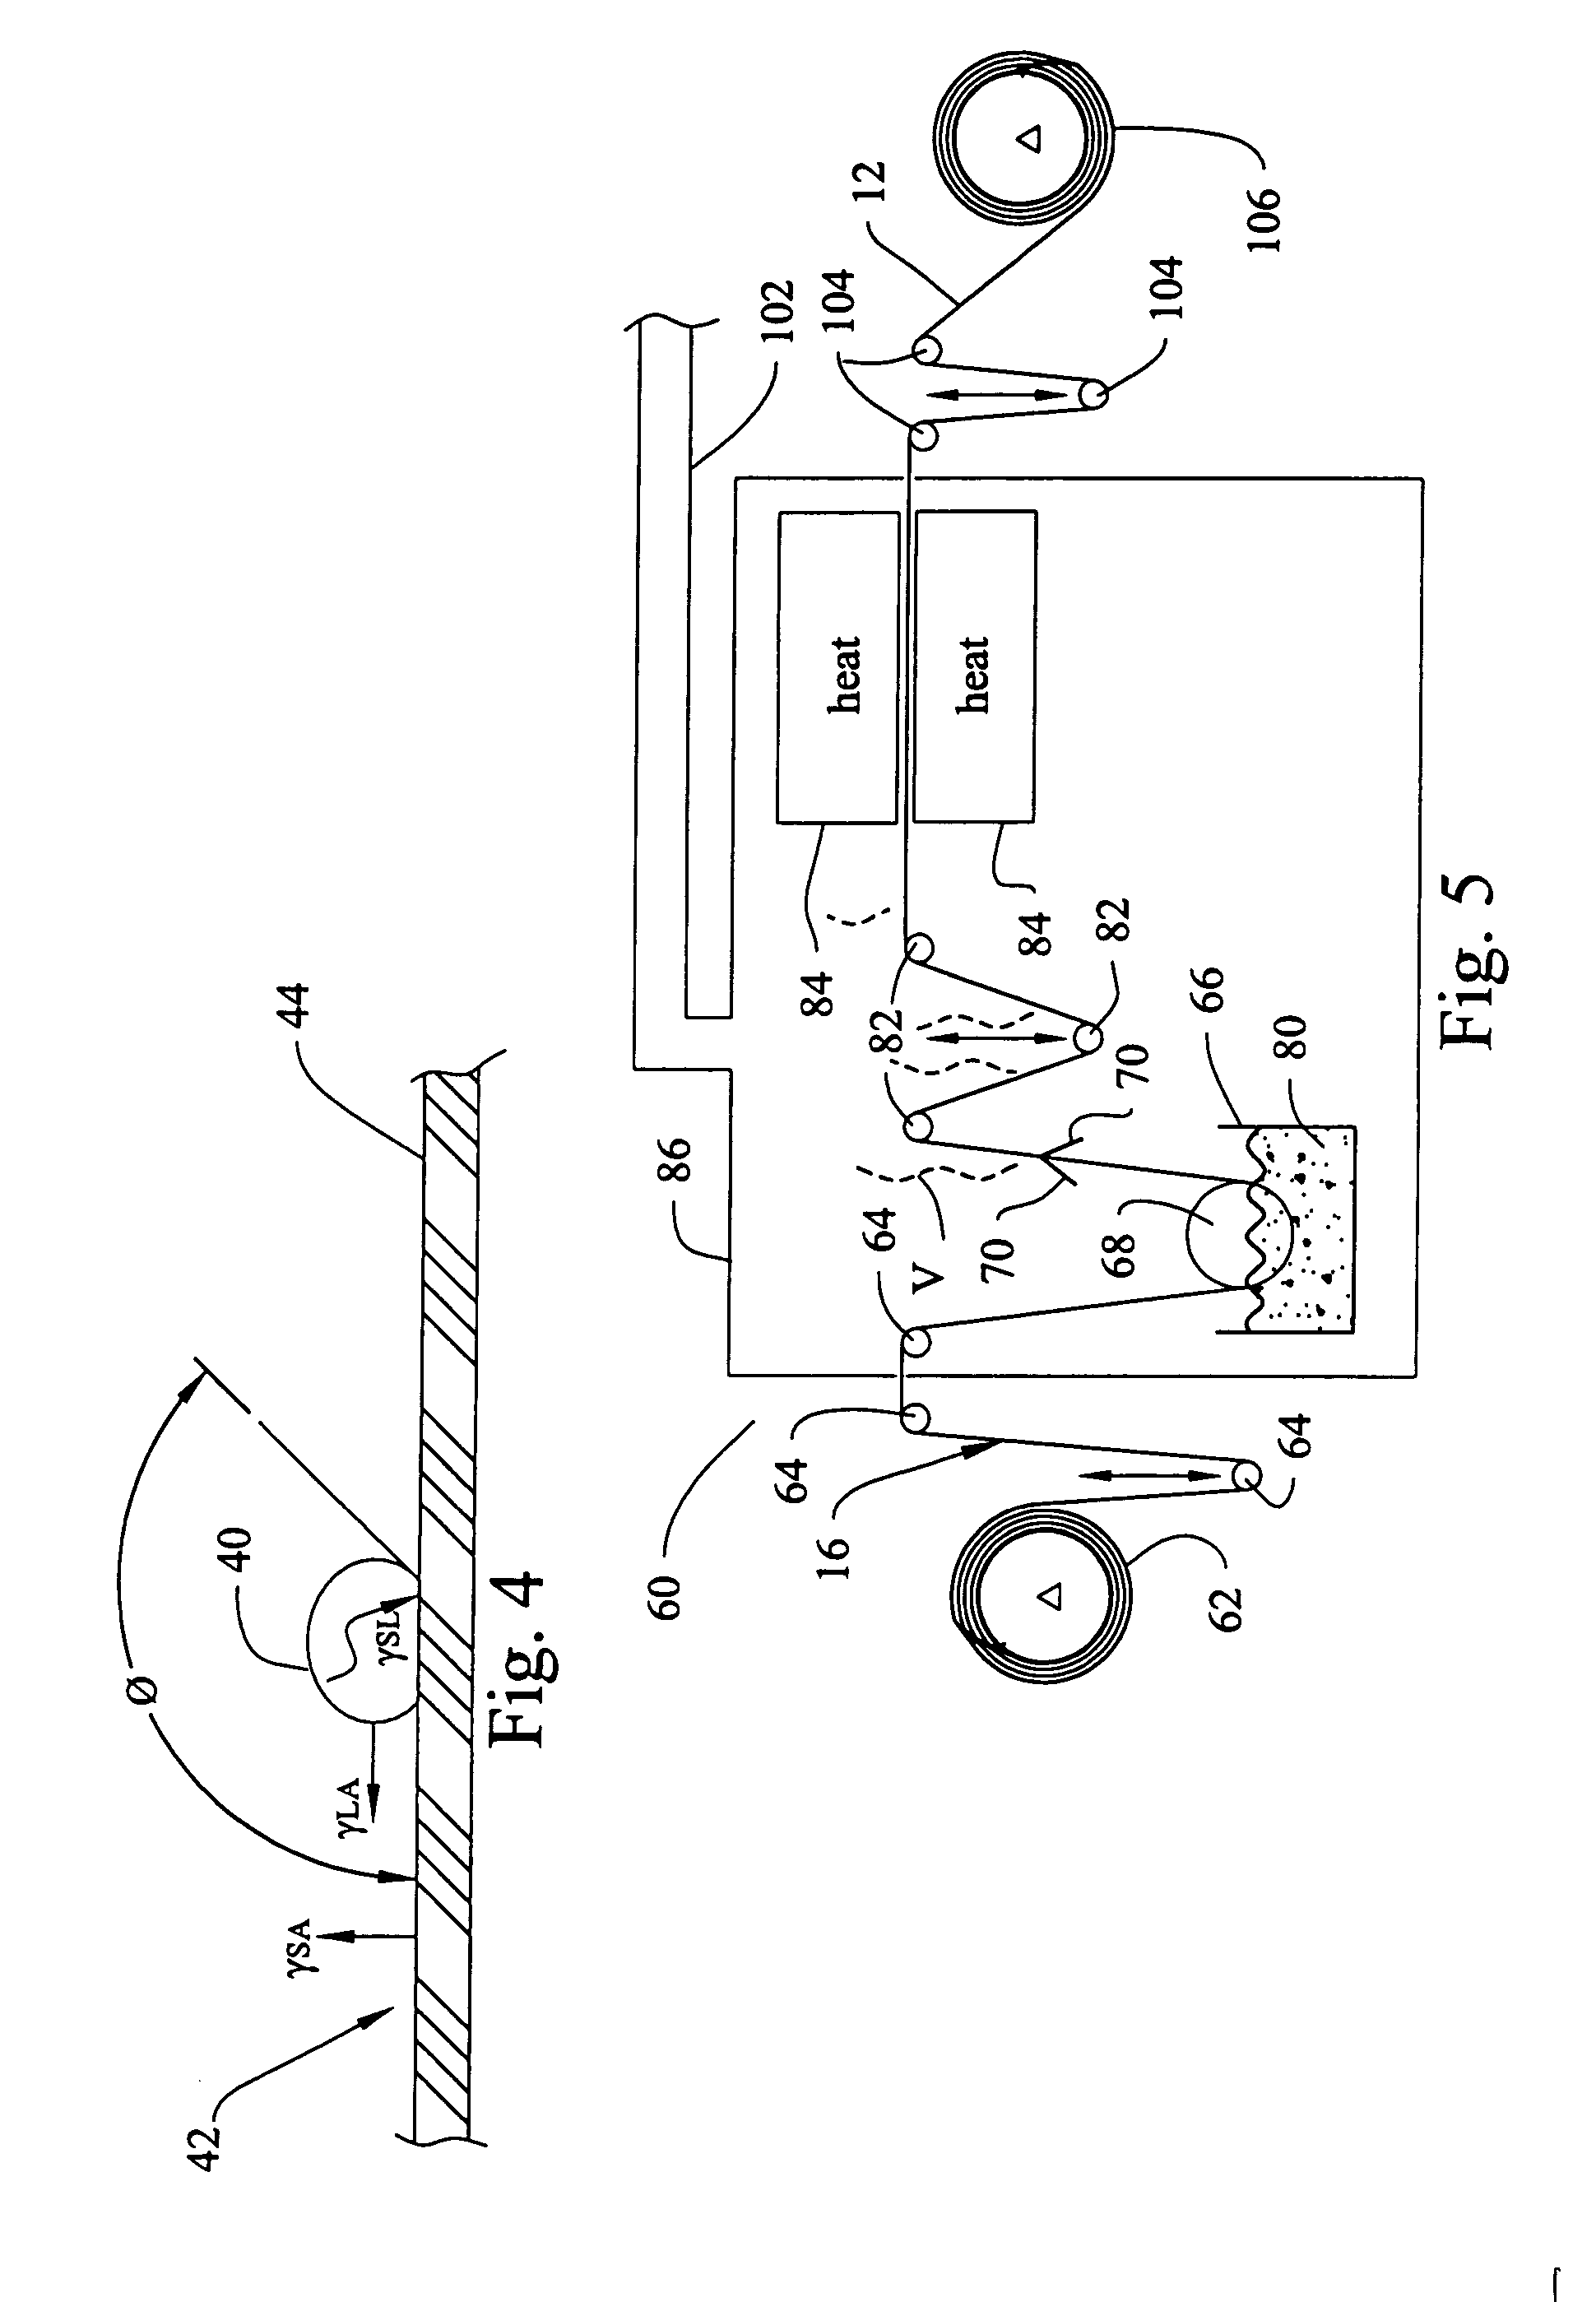 Porous membrane structure and method